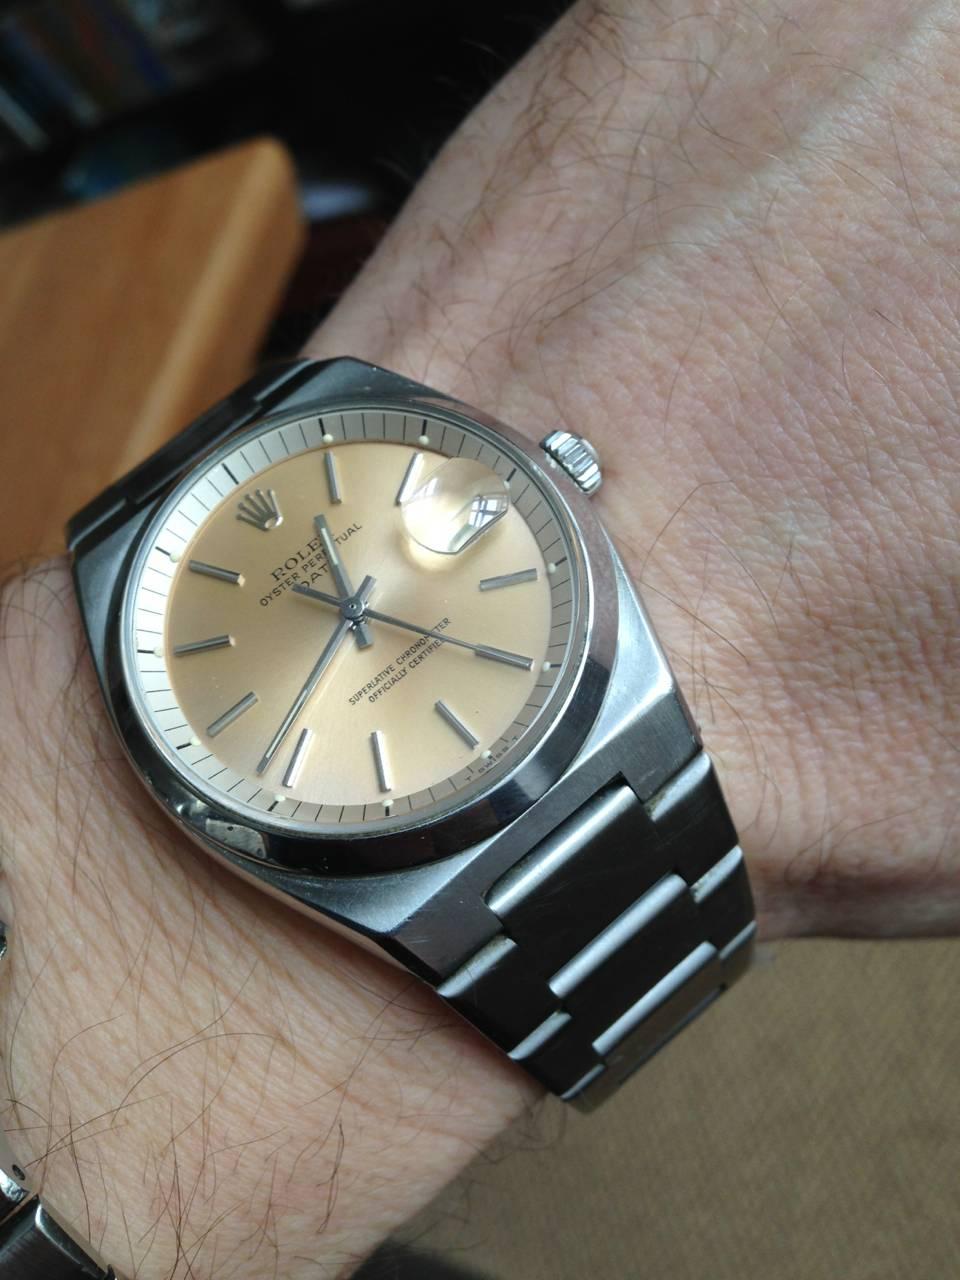 Mid-Century Modern Very Rare Rolex Ref. 1530 , Color Change Dial